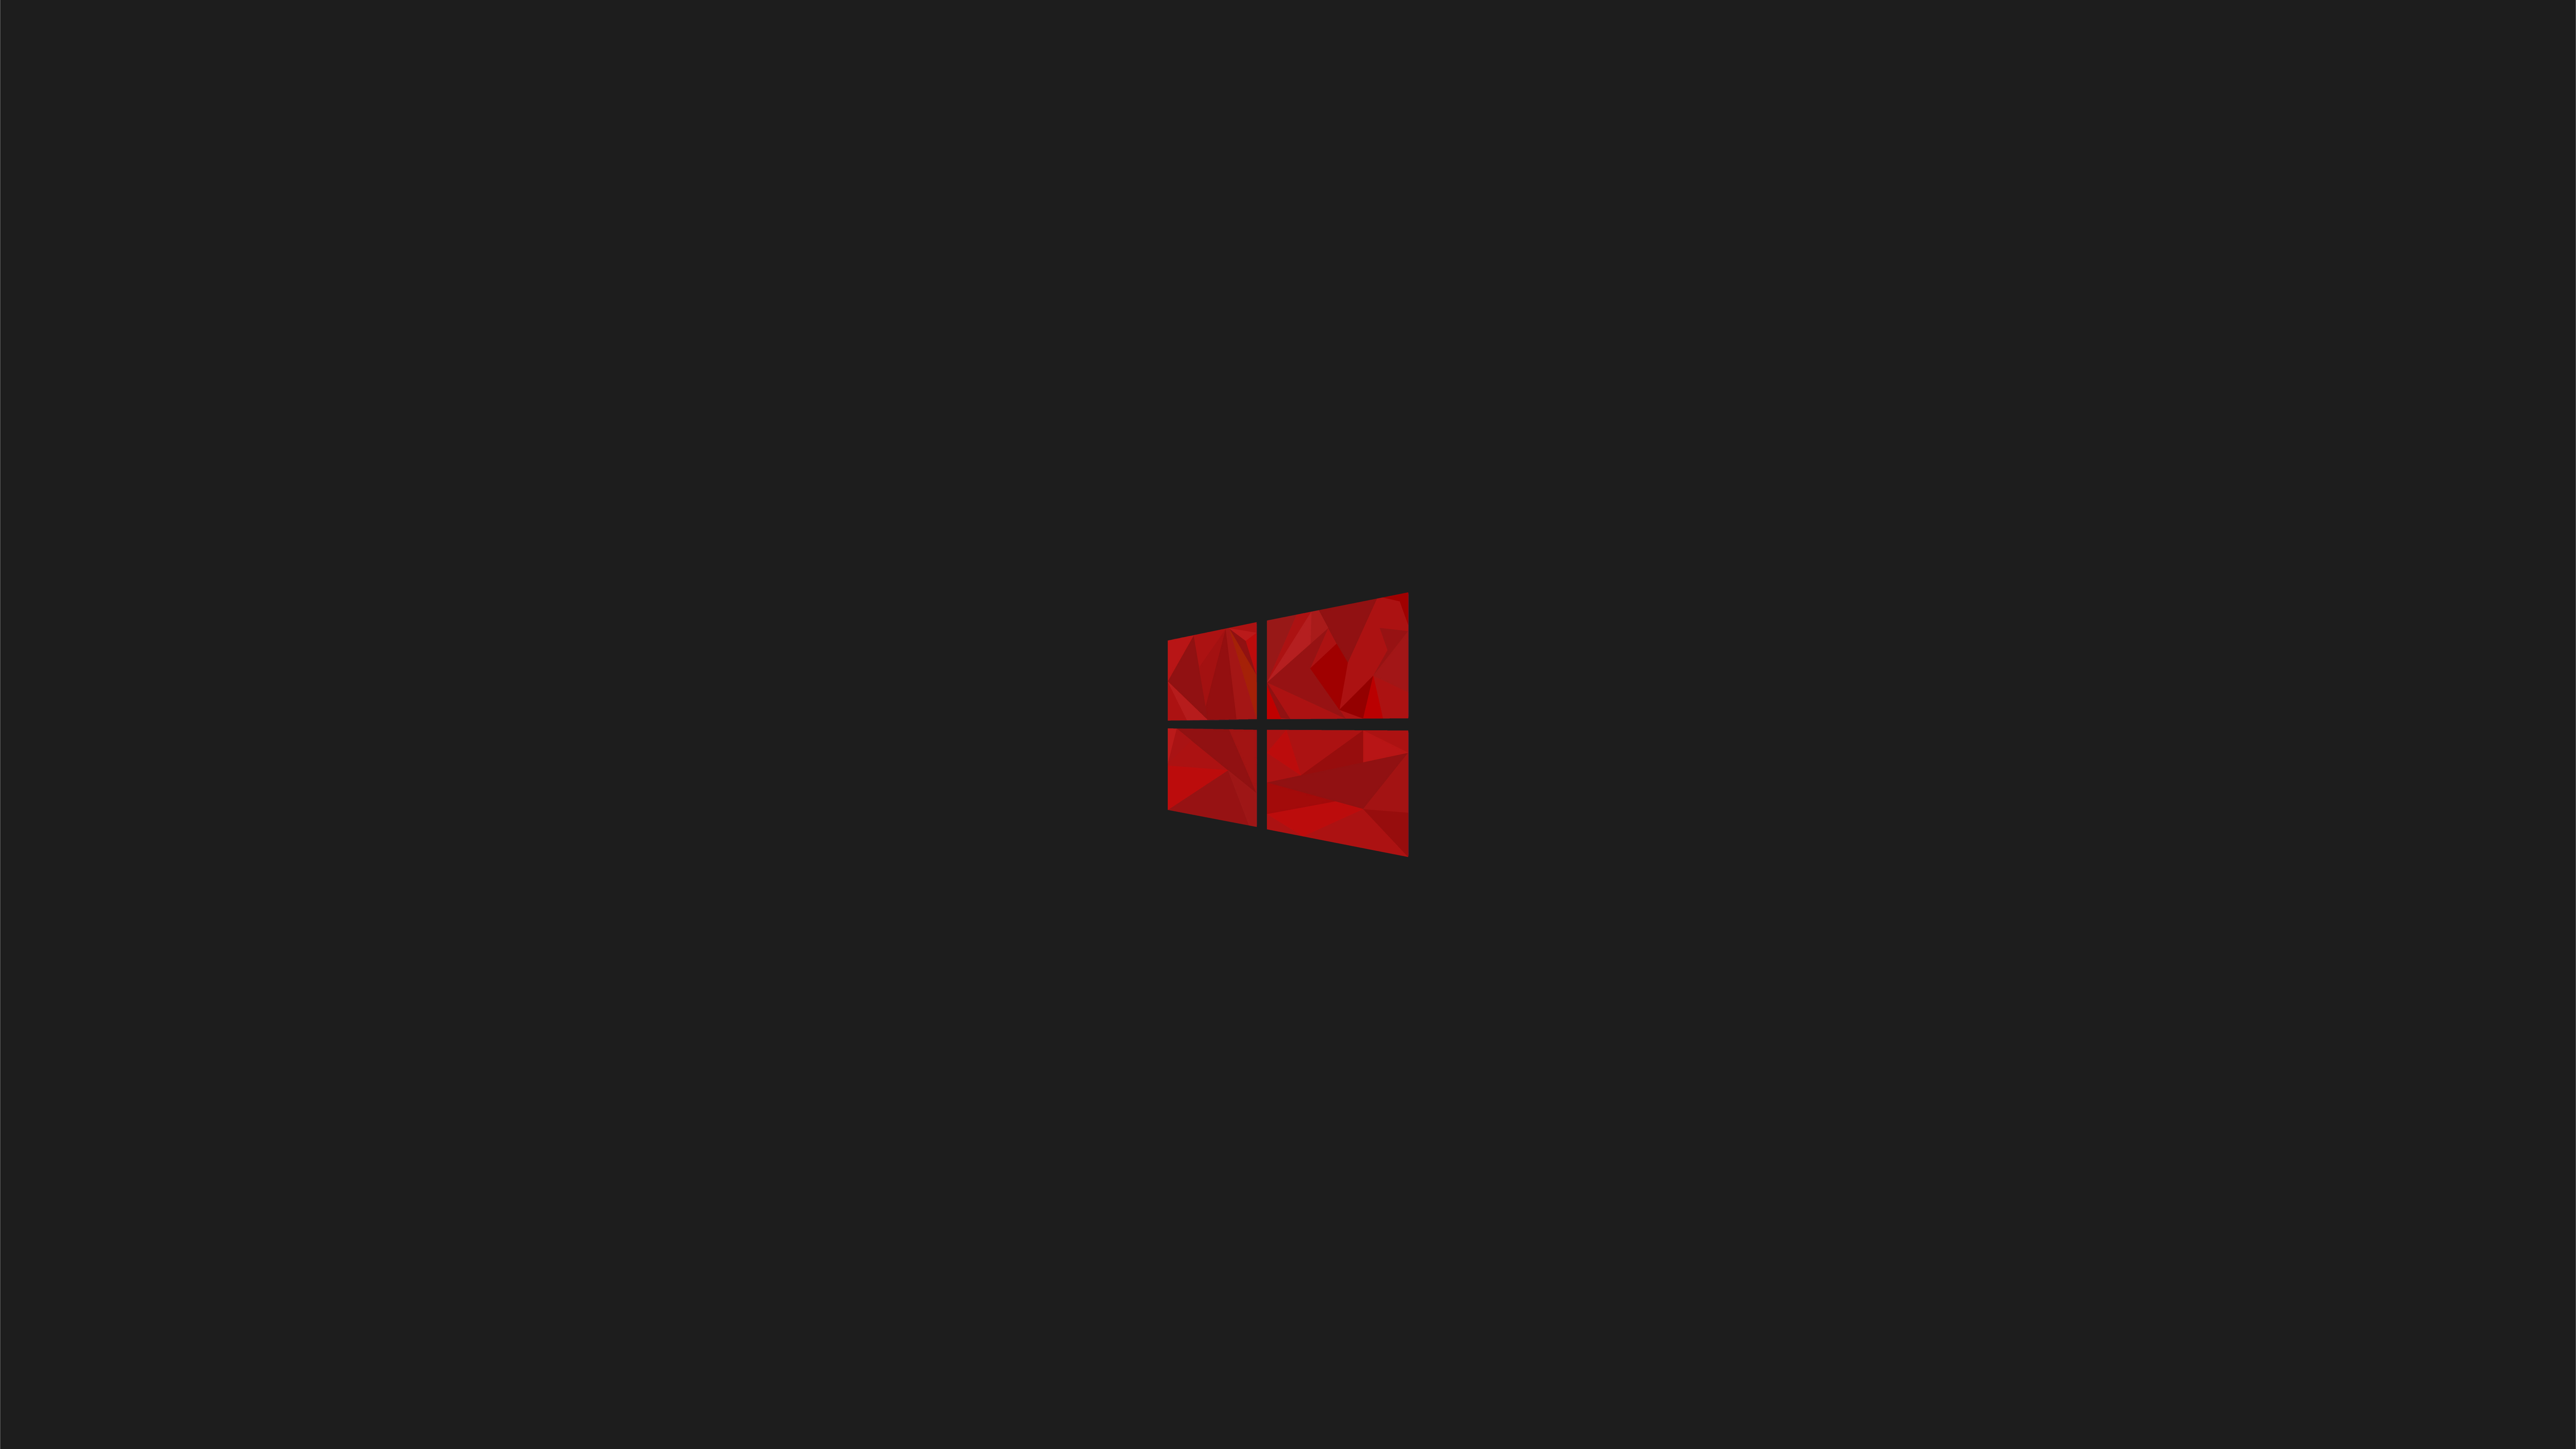 Windows red minimal simple logo k hd puter k wallpapers images backgrounds photos and pictures